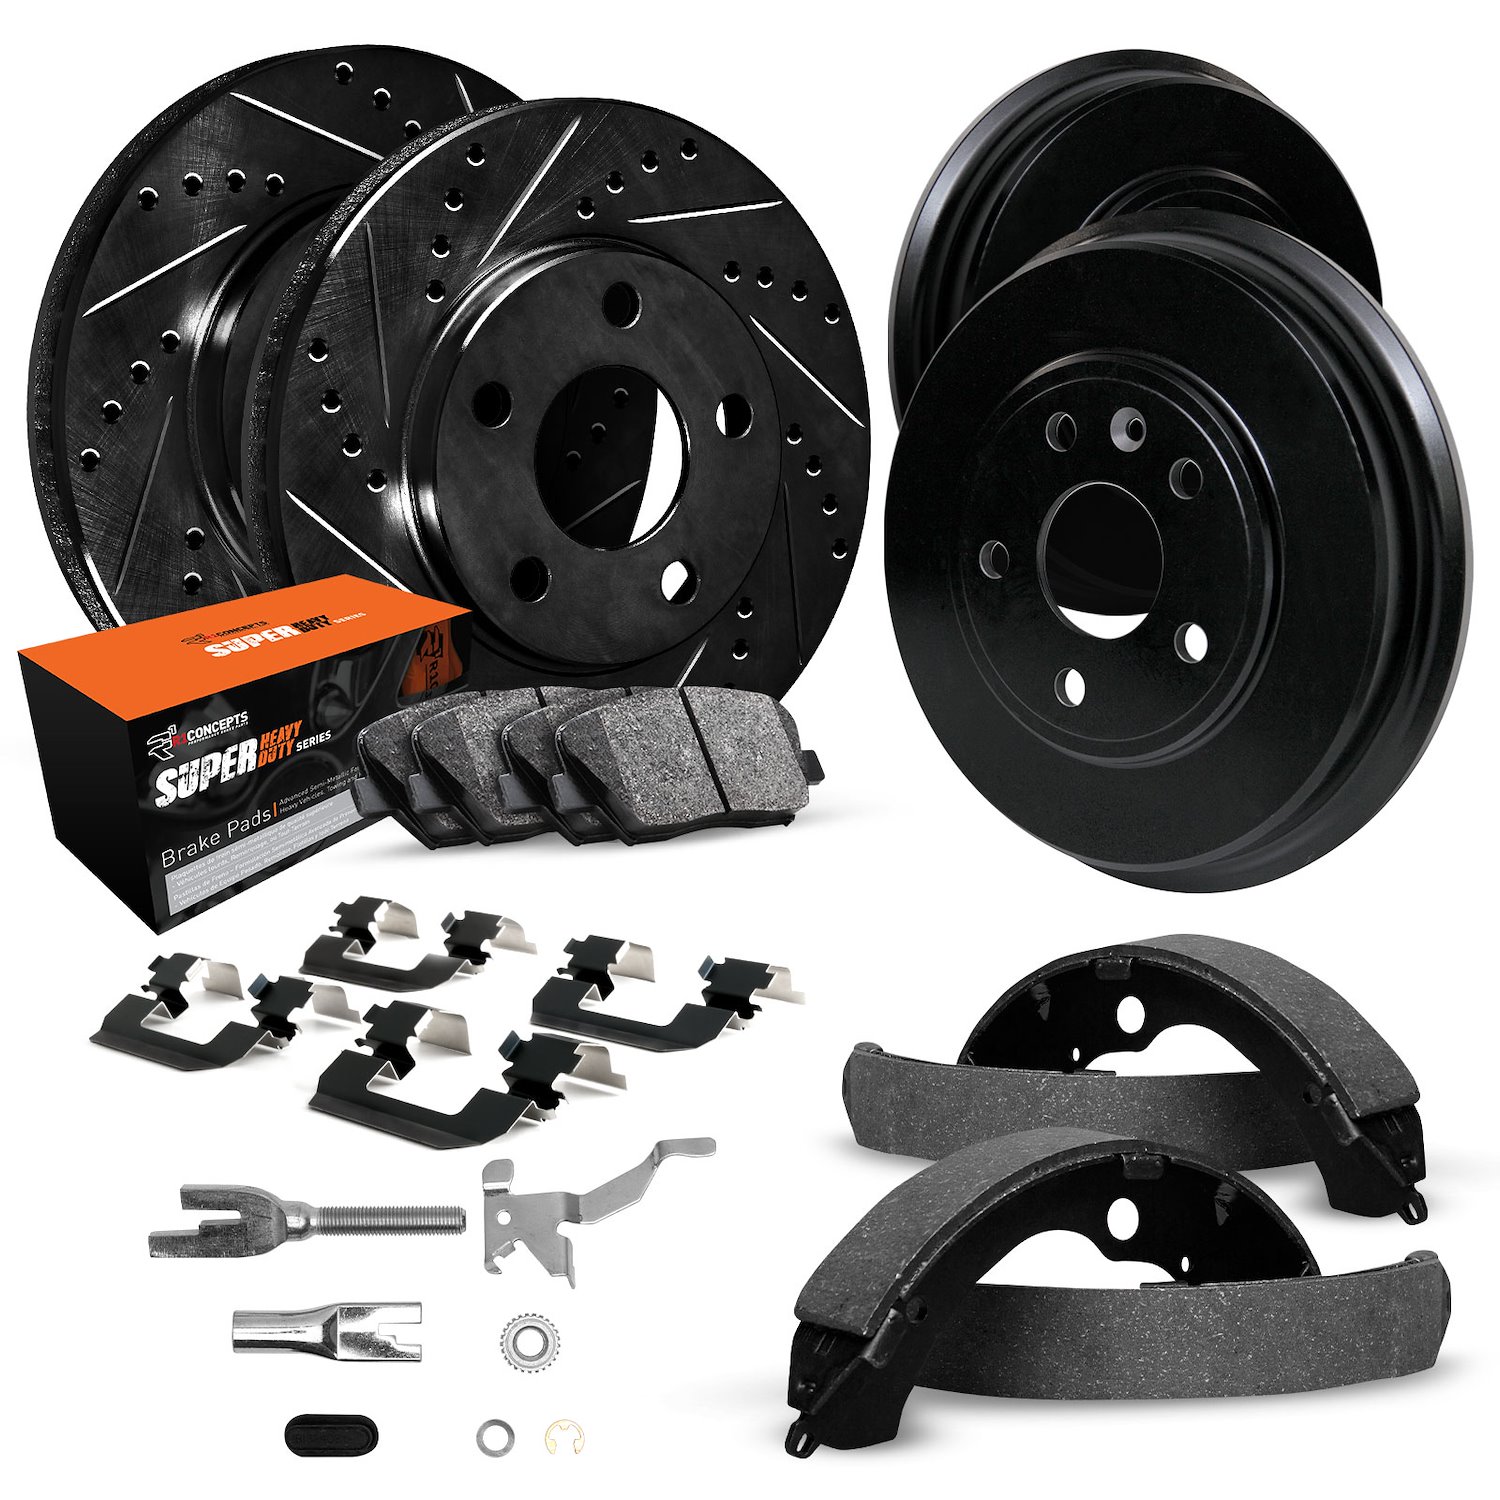 E-Line Drilled/Slotted Black Rotor & Drum Set w/Super-Duty Pads, Shoes, Hardware/Adjusters, 1975-1991 GM